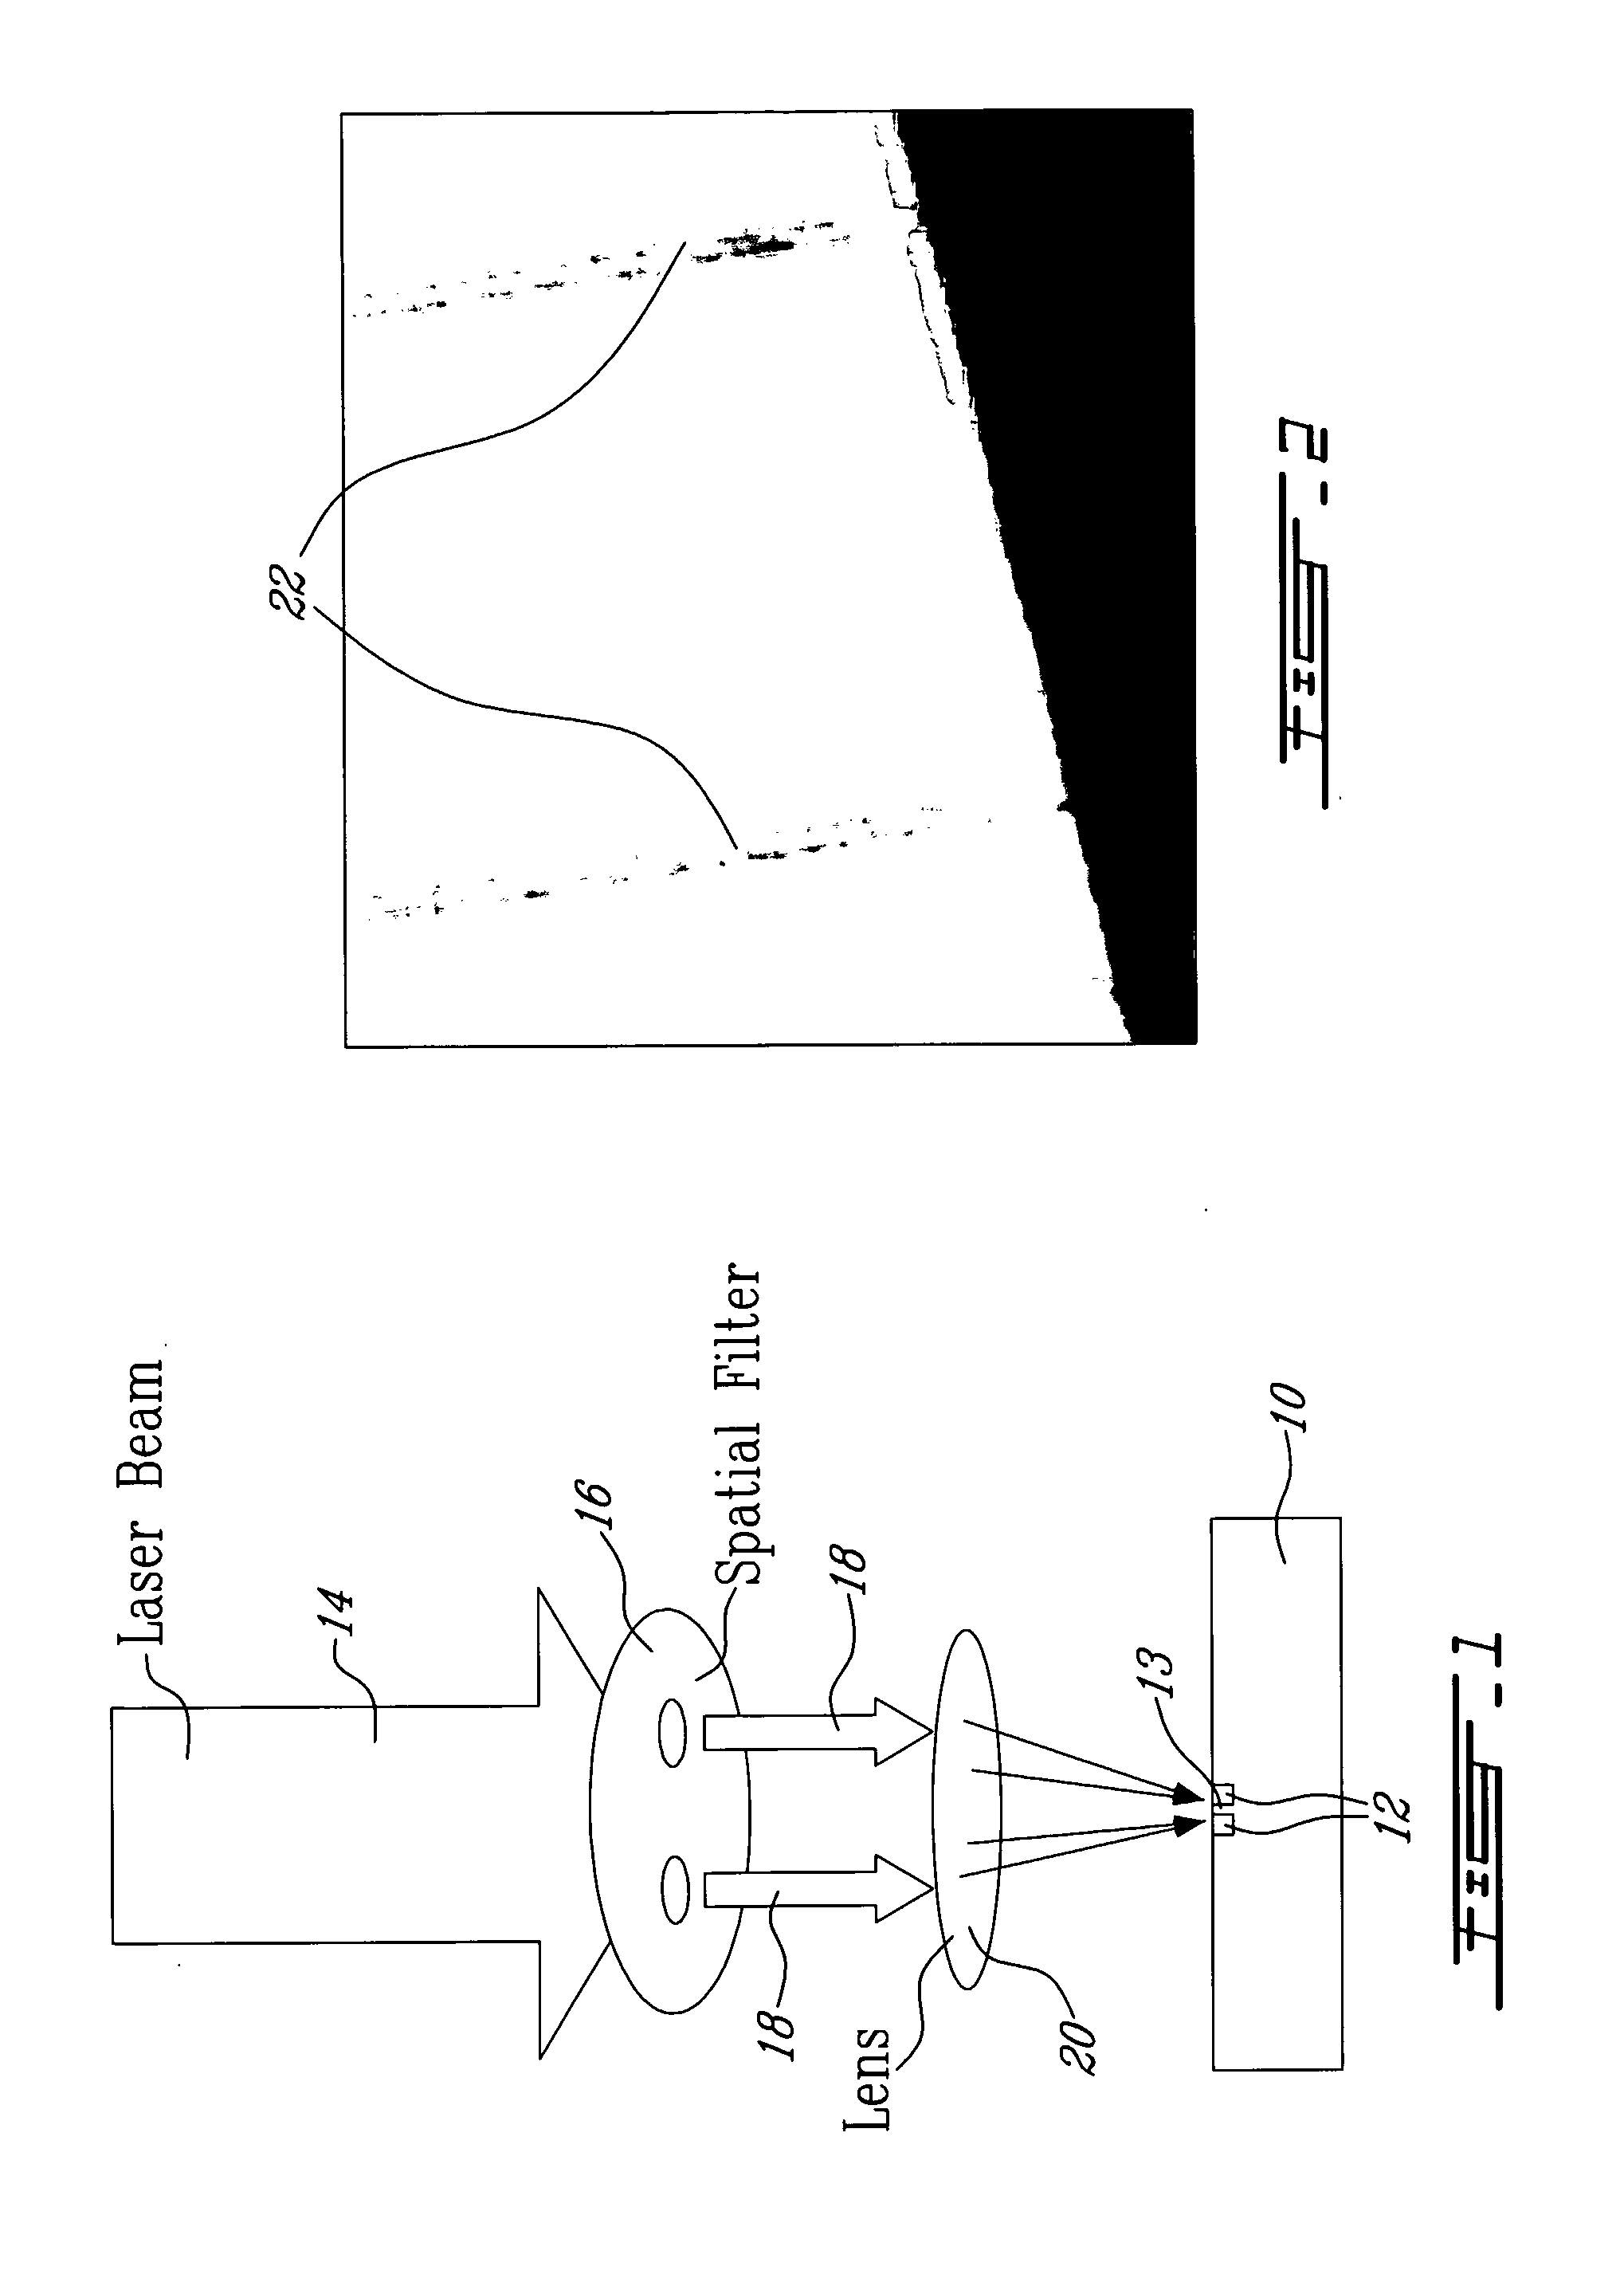 Process for Fabricating Optical Waveguides